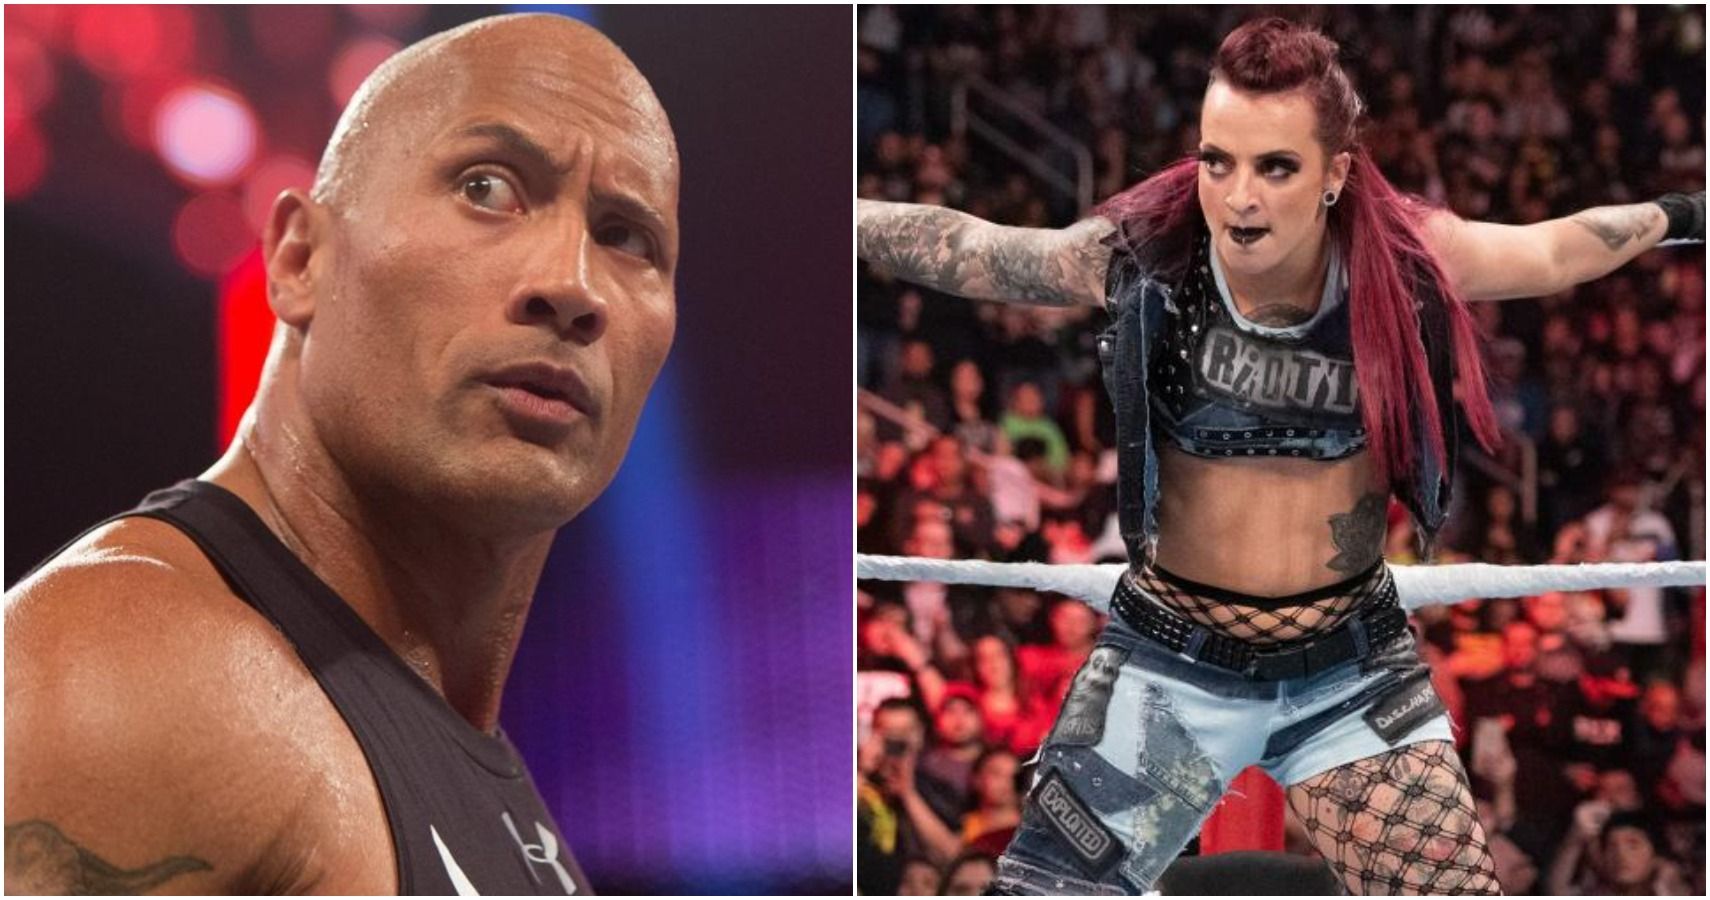 The Rock and Ruby Riott